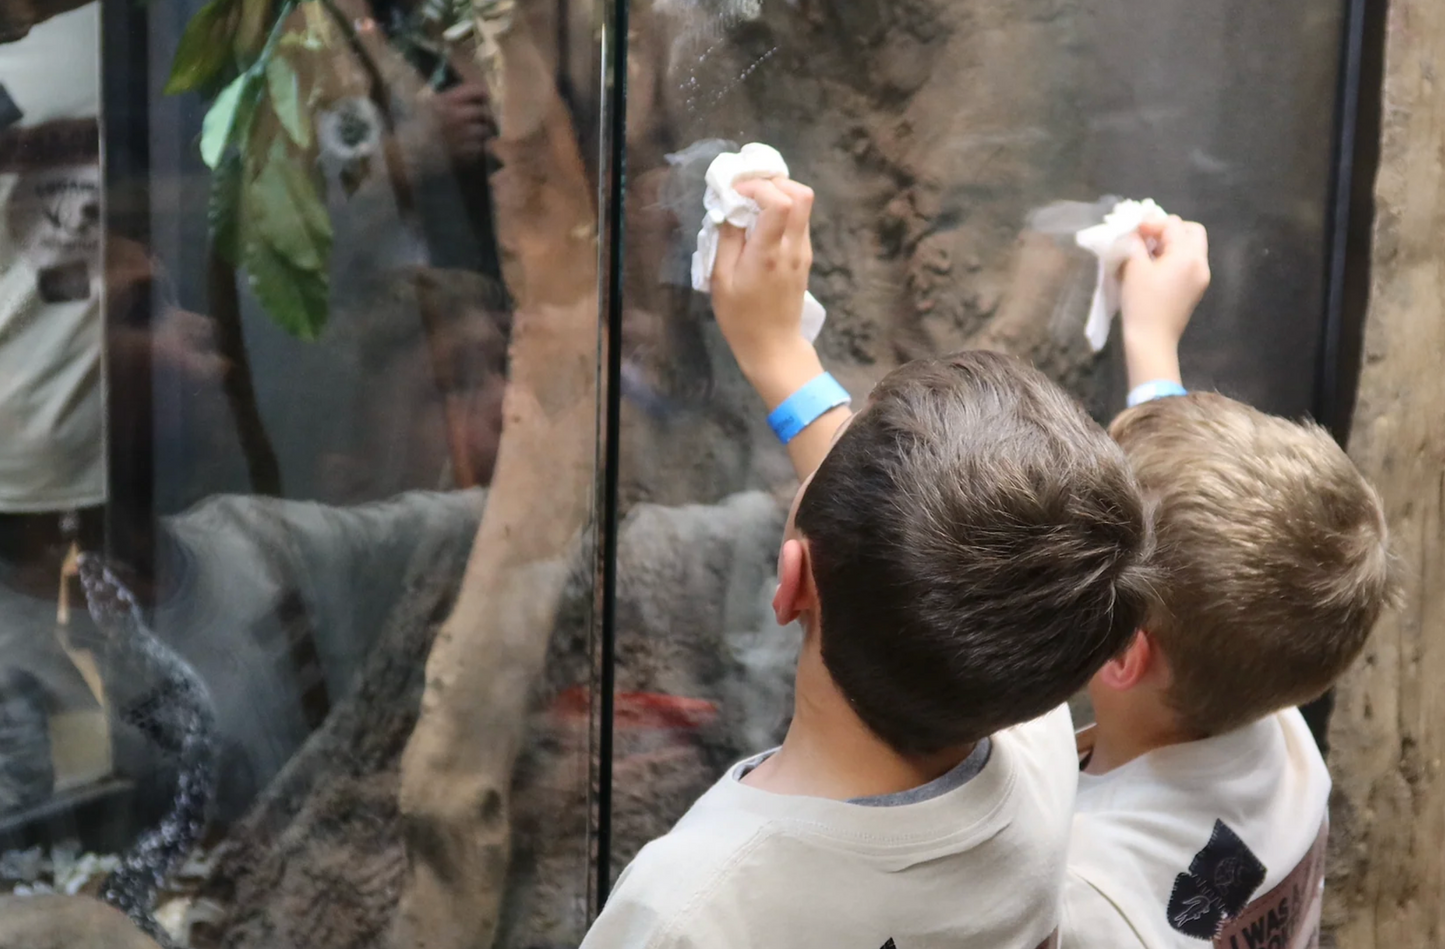 Junior Zookeeper Day at The Reptarium - Wednesday, April 24th - 5:00 PM - 7:00 PM